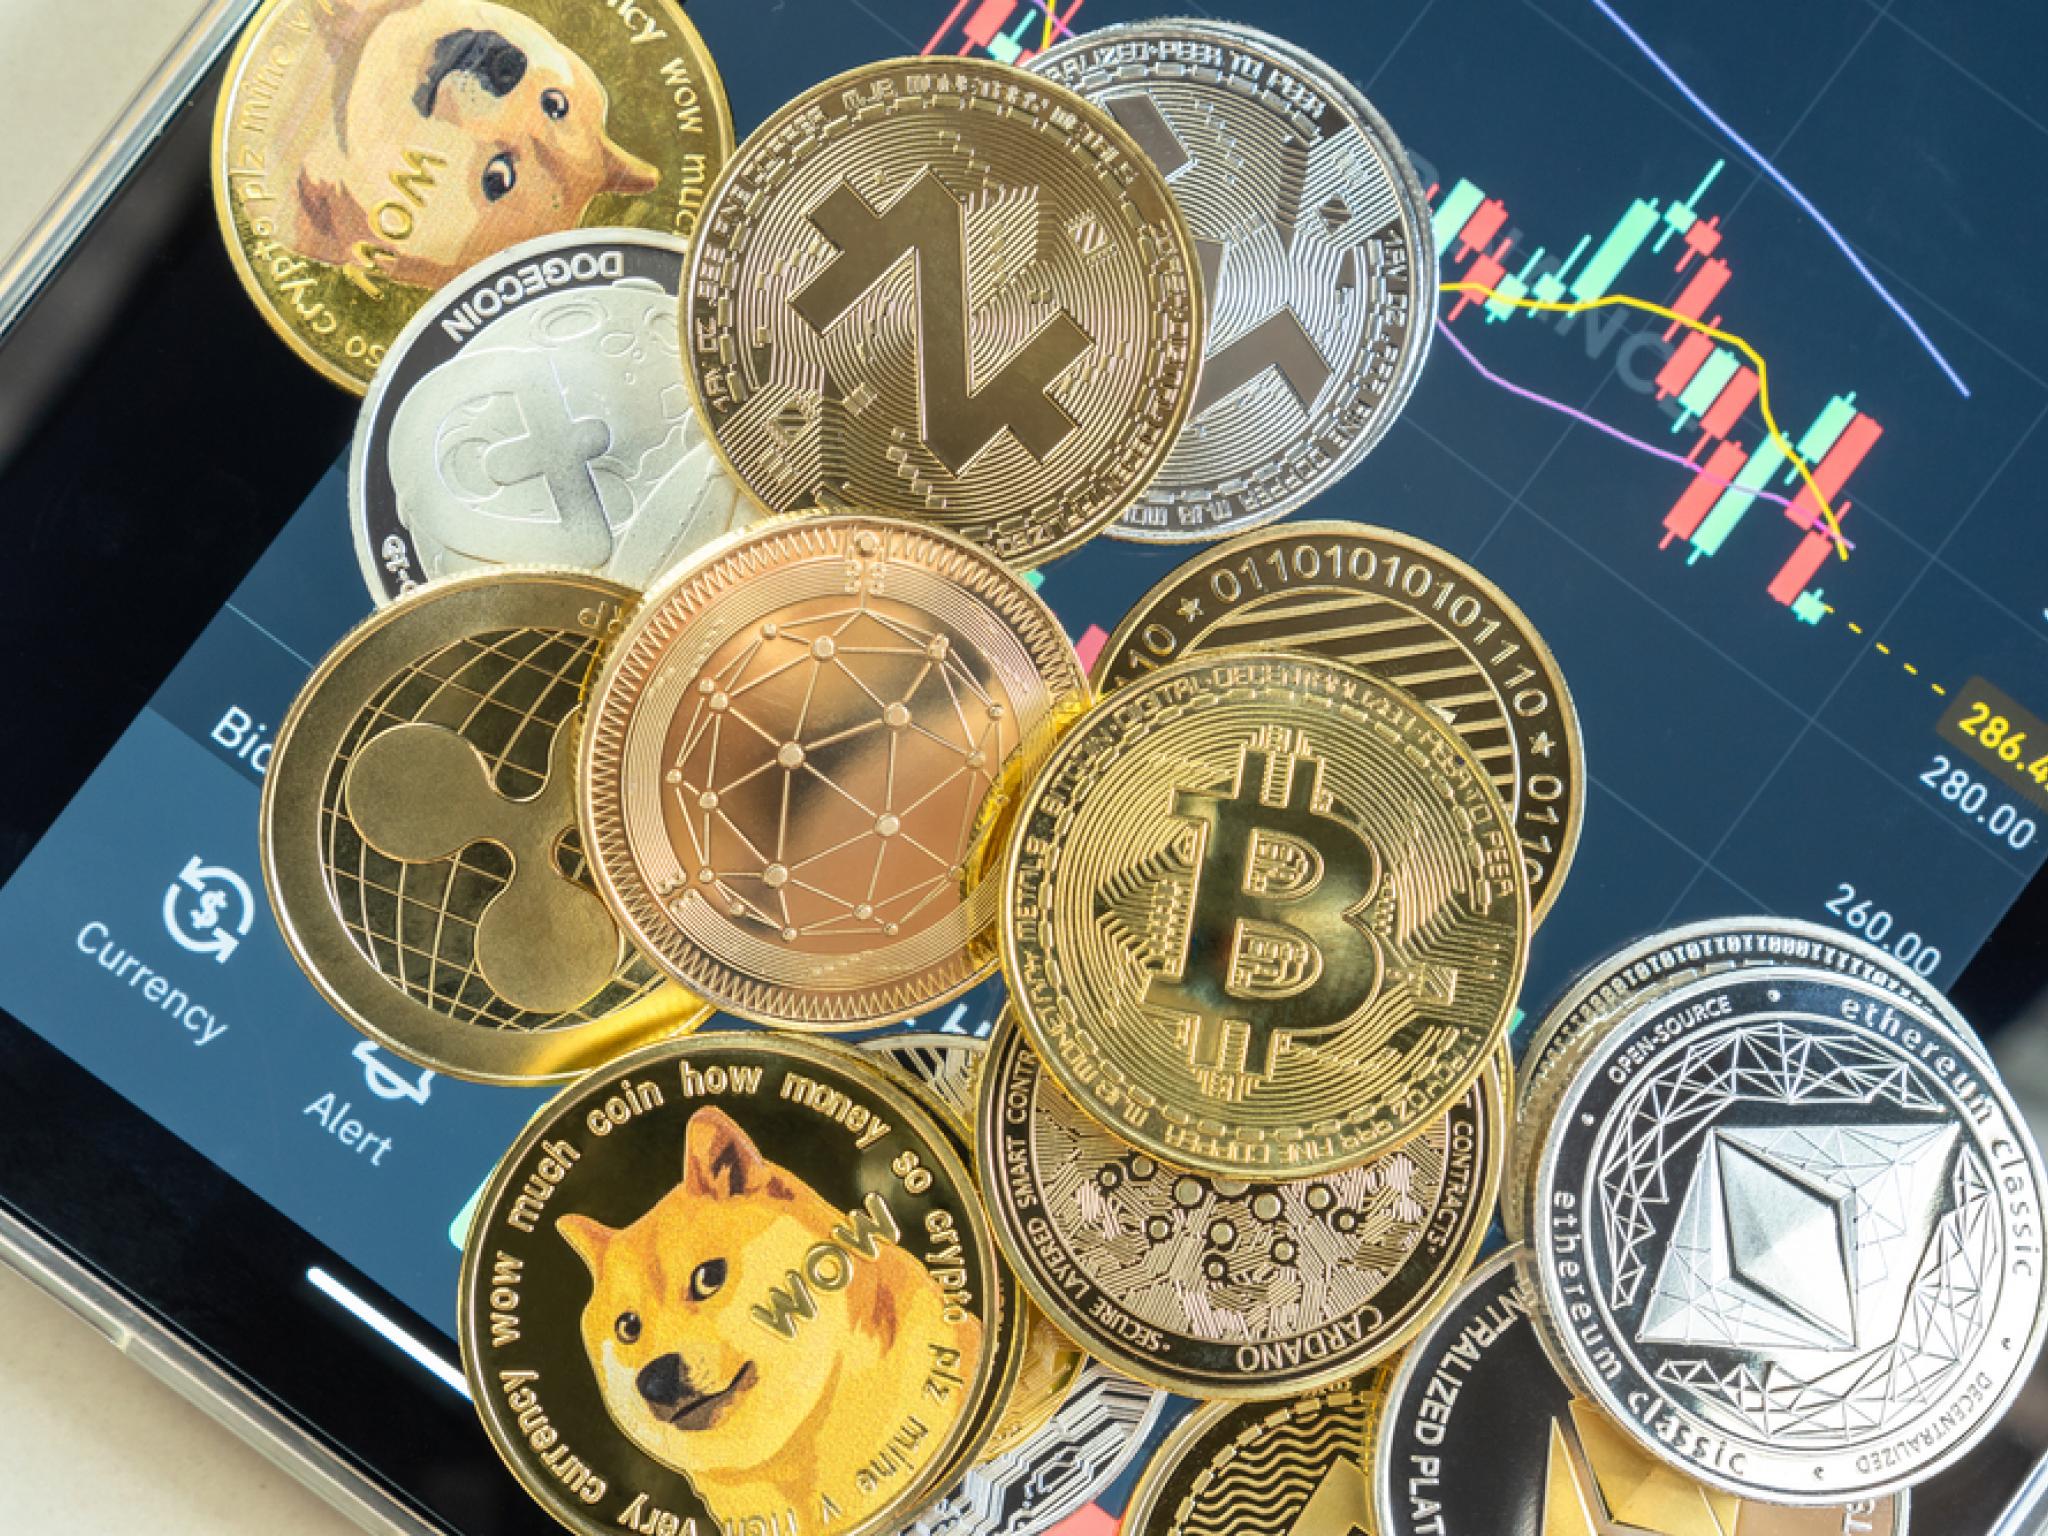  bitcoin-ethereum-dogecoin-rally-looks-tired-but-these-ai-big-data-coins-are-heroes-of-the-day-says-market-intelligence-platform 